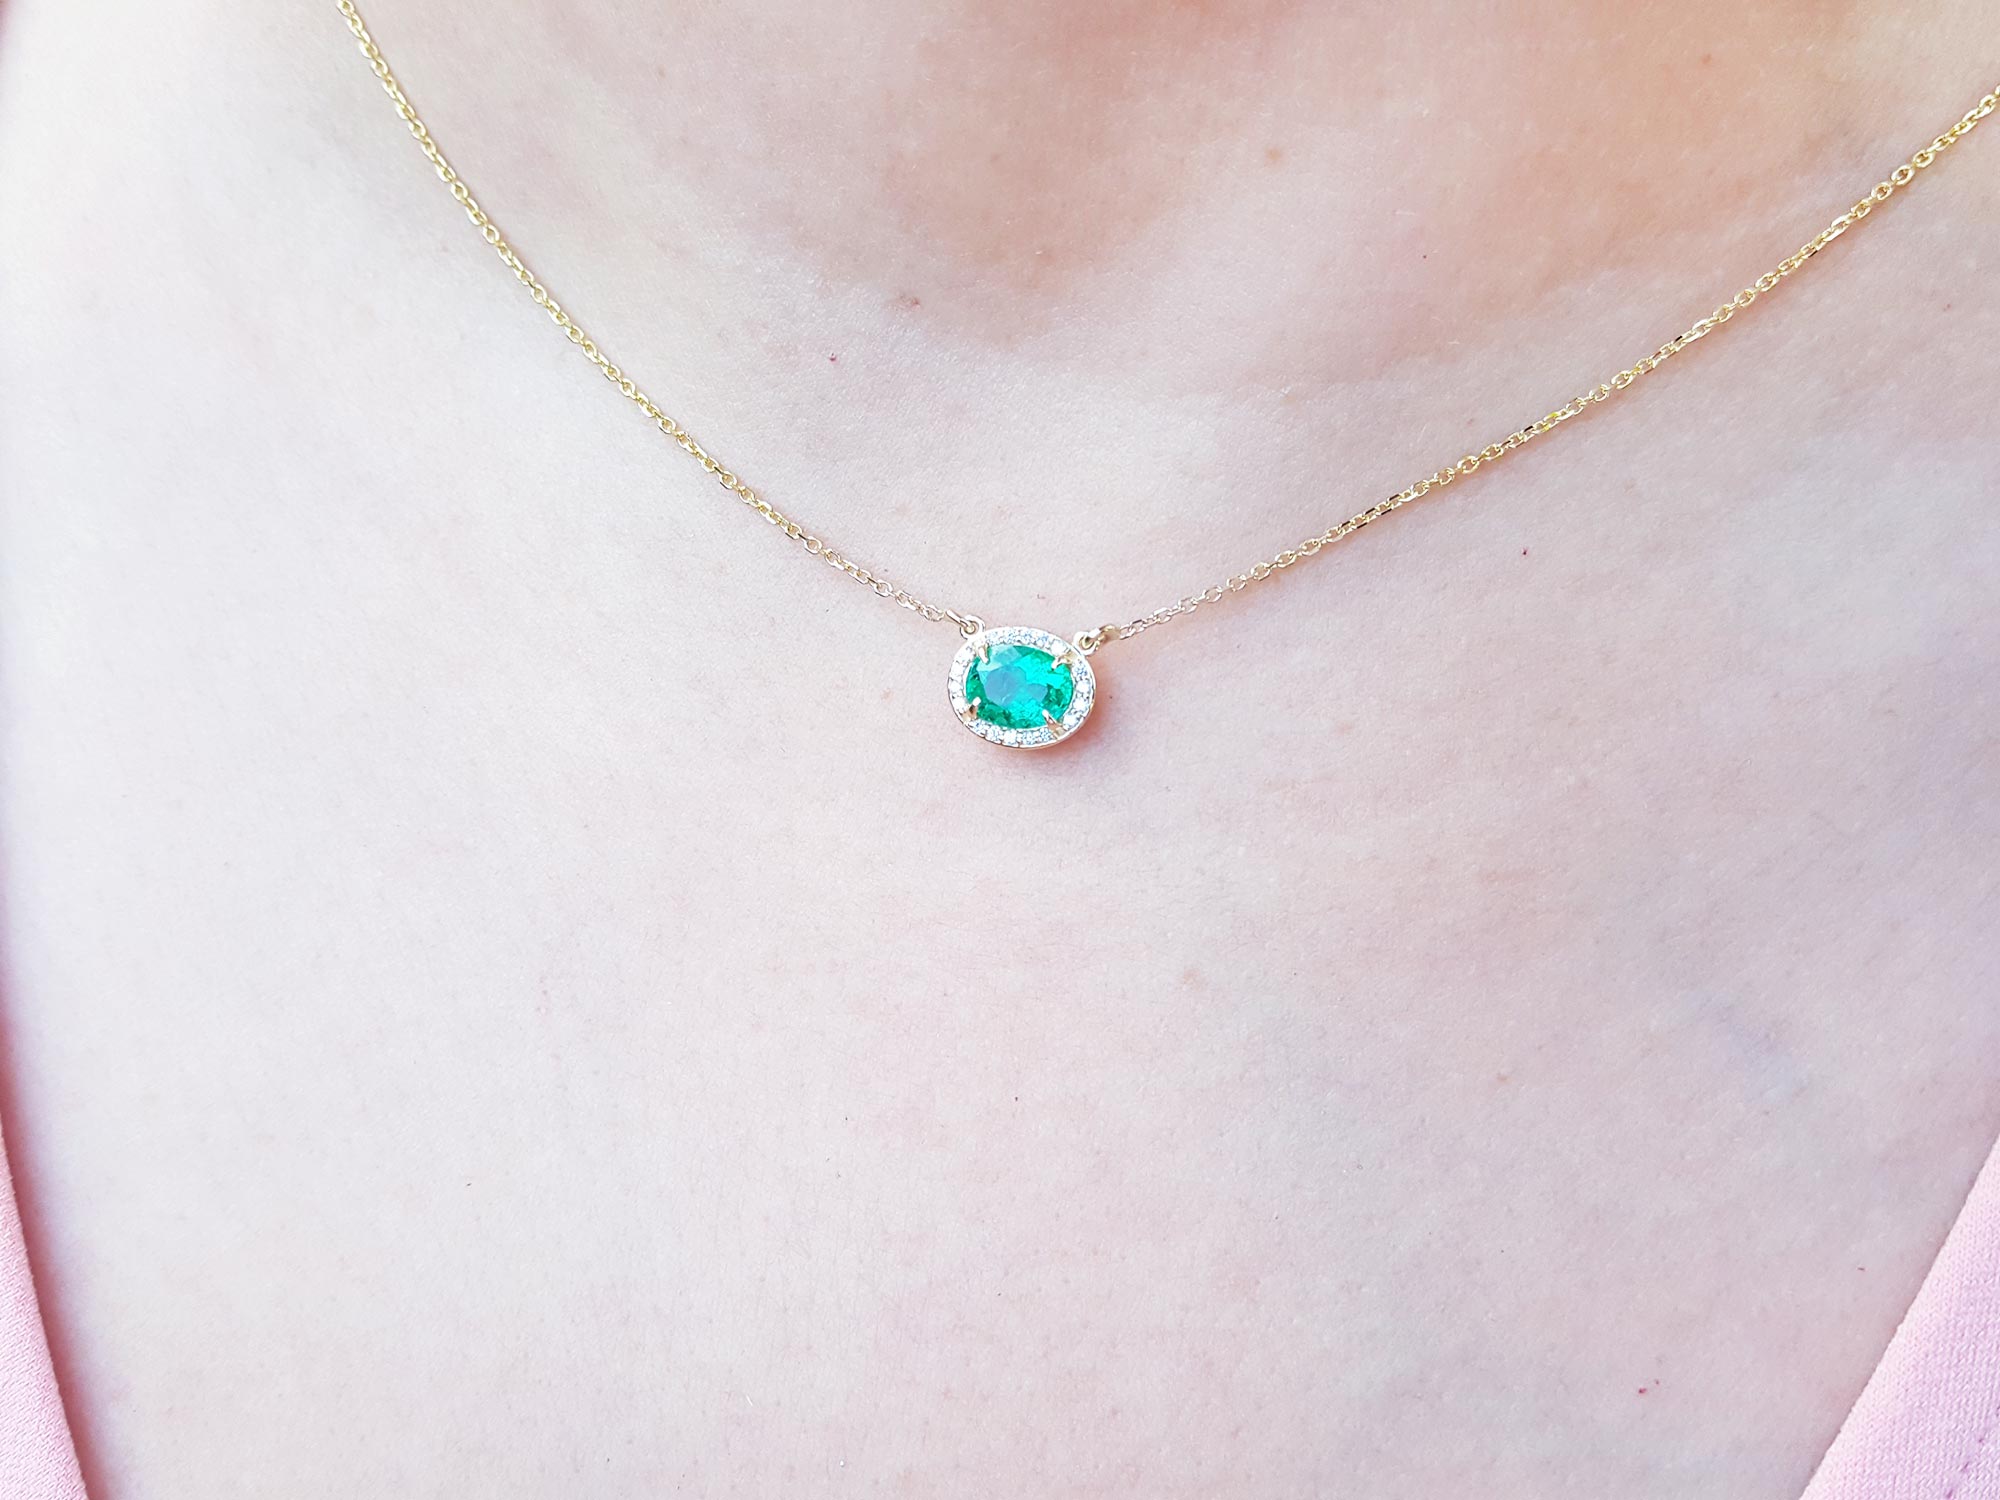 Yellow gold emerald necklace